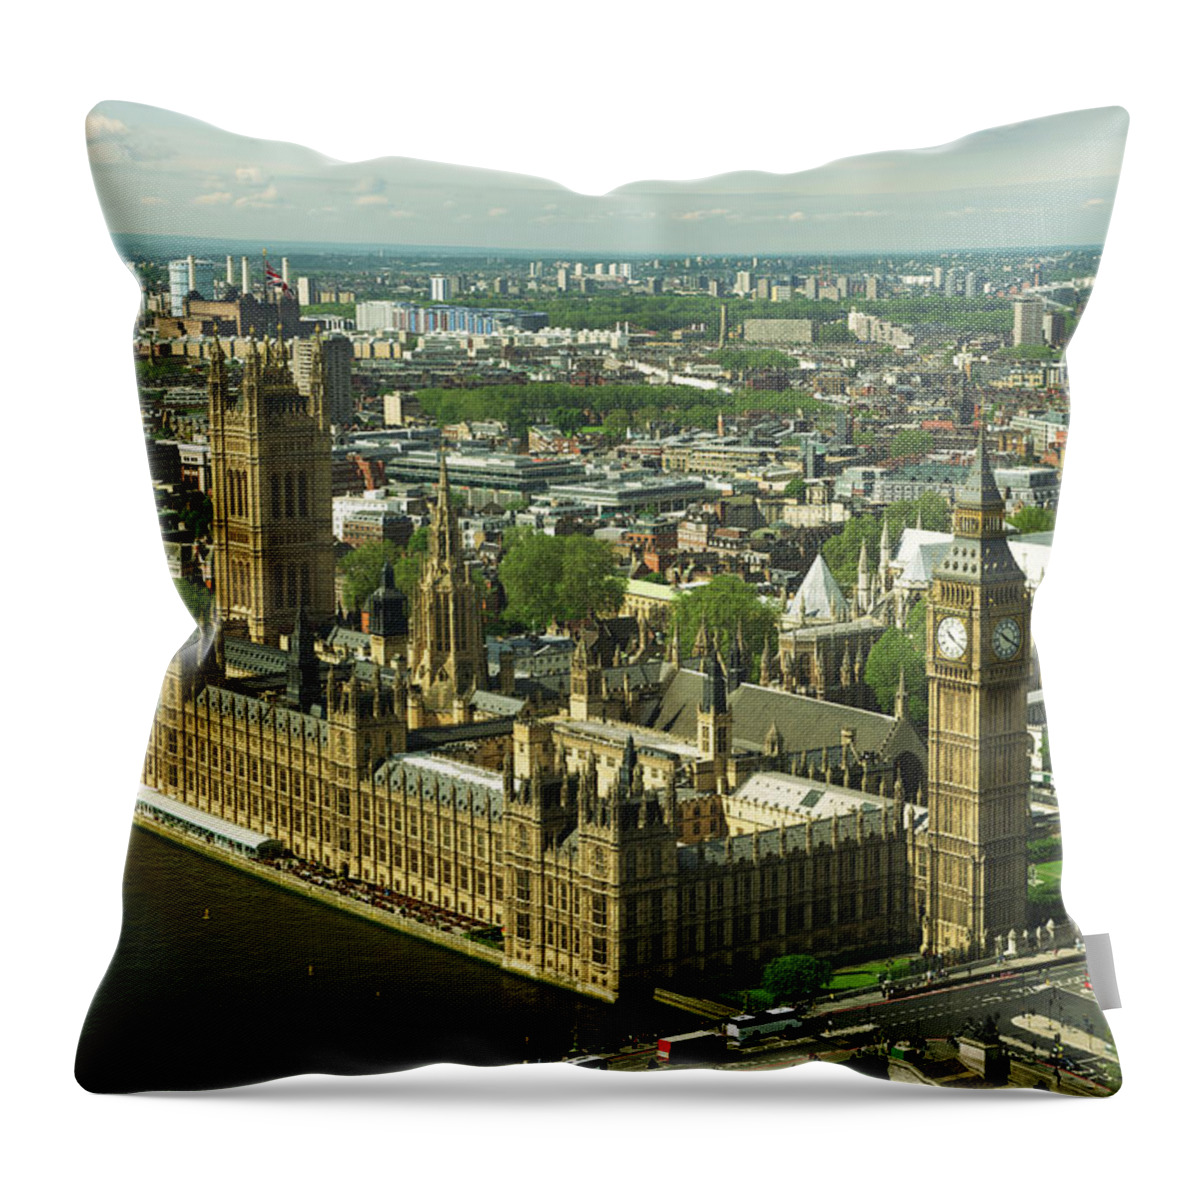 English Culture Throw Pillow featuring the photograph Westminster Palace London Skyline From by Peskymonkey